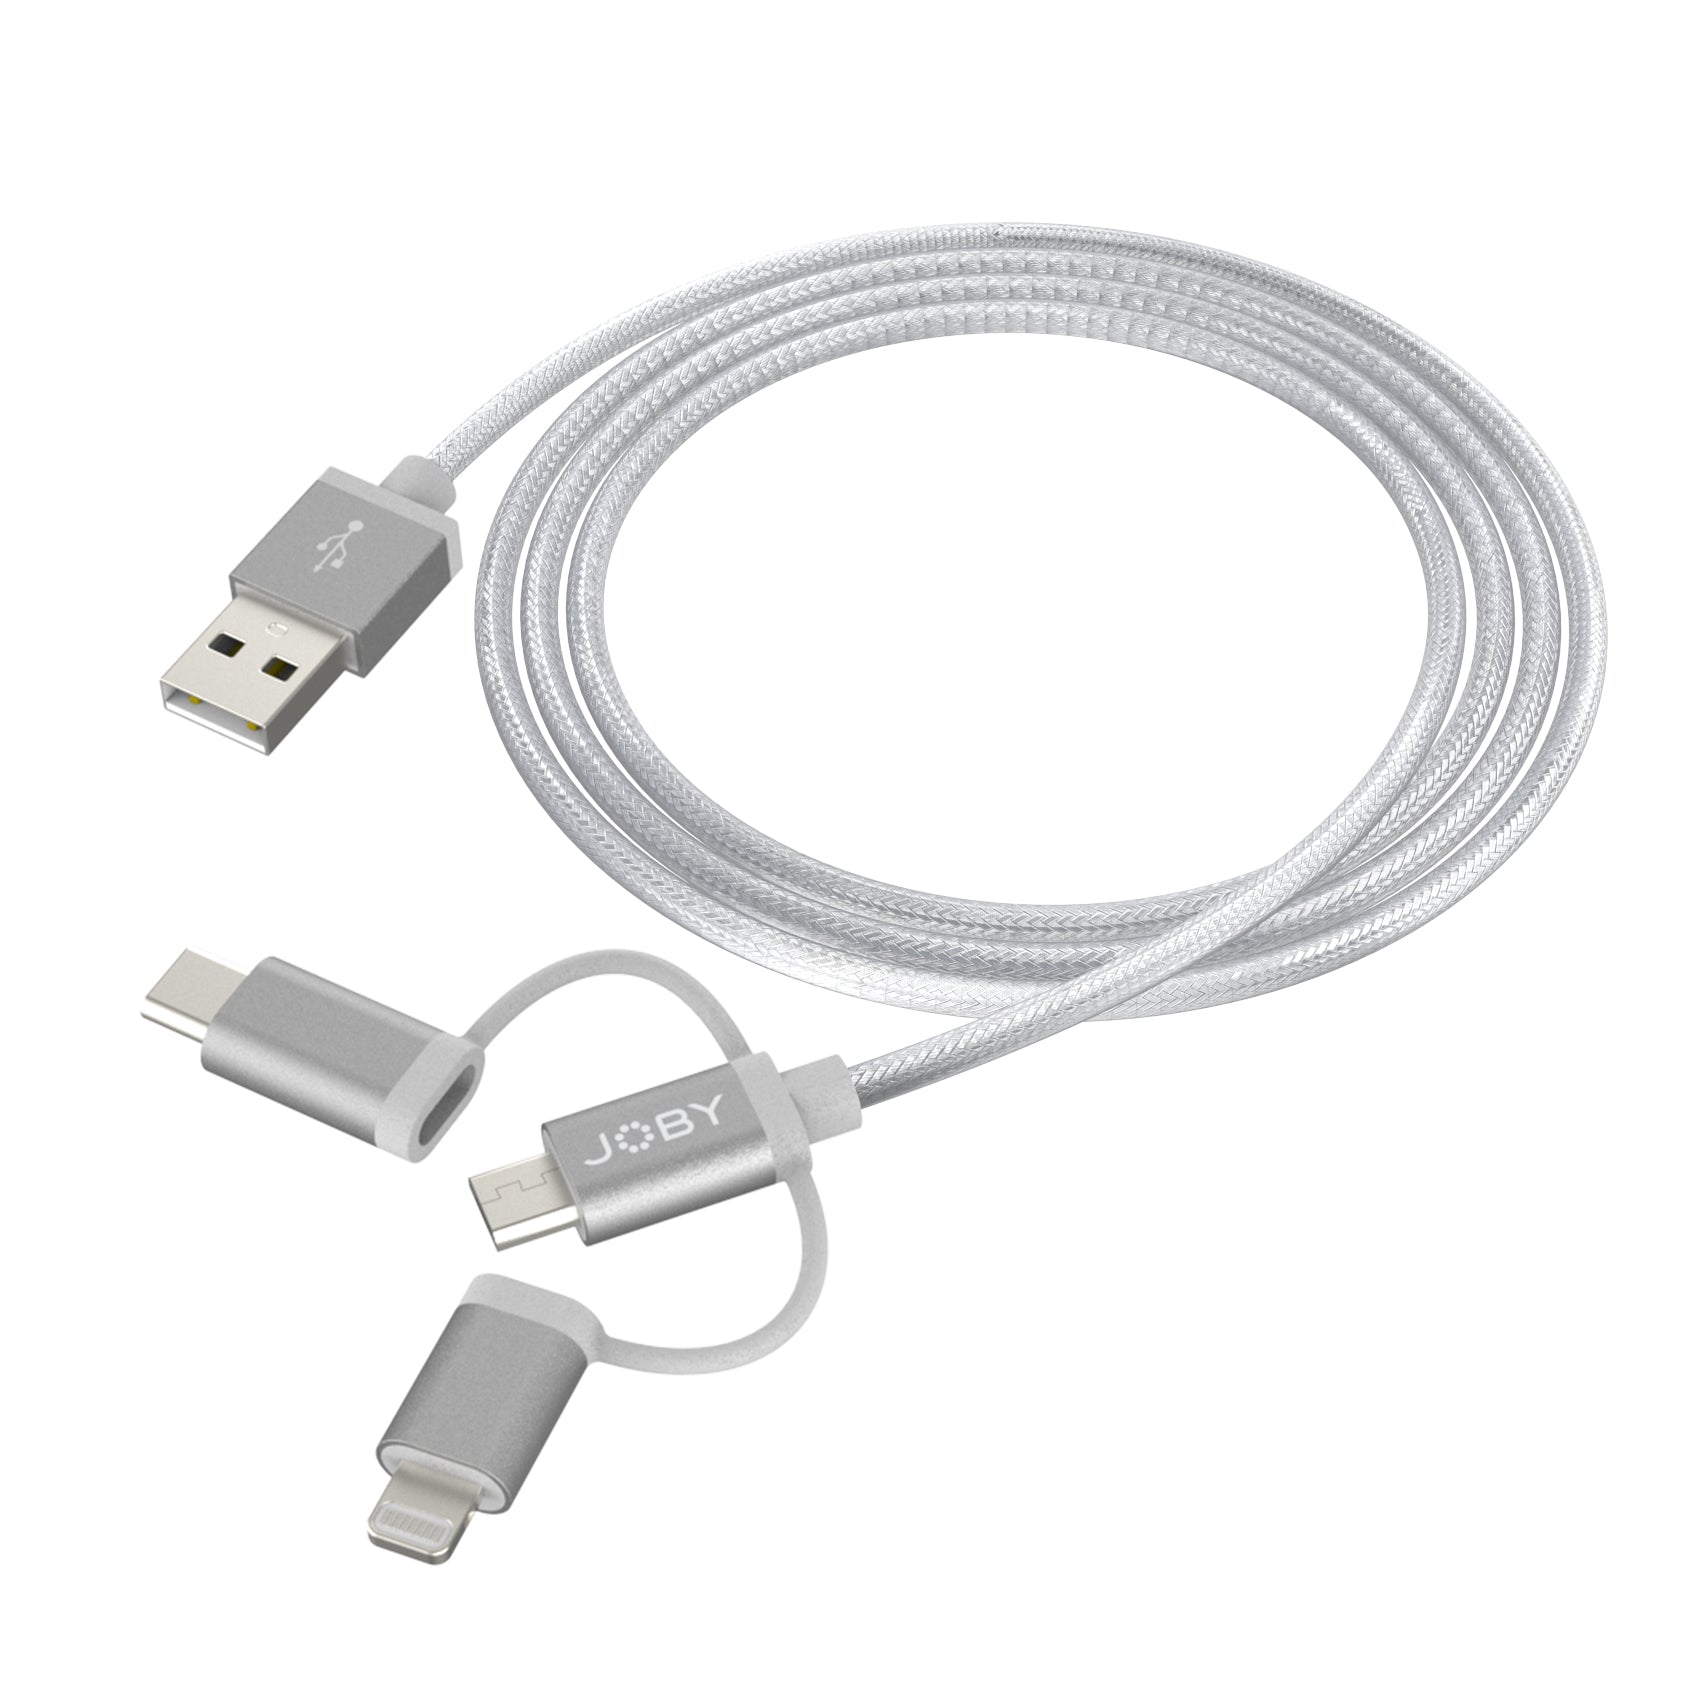 Joby Charge and Sync Cable 3-in-1 - Space Grey - 1.2m/4ft